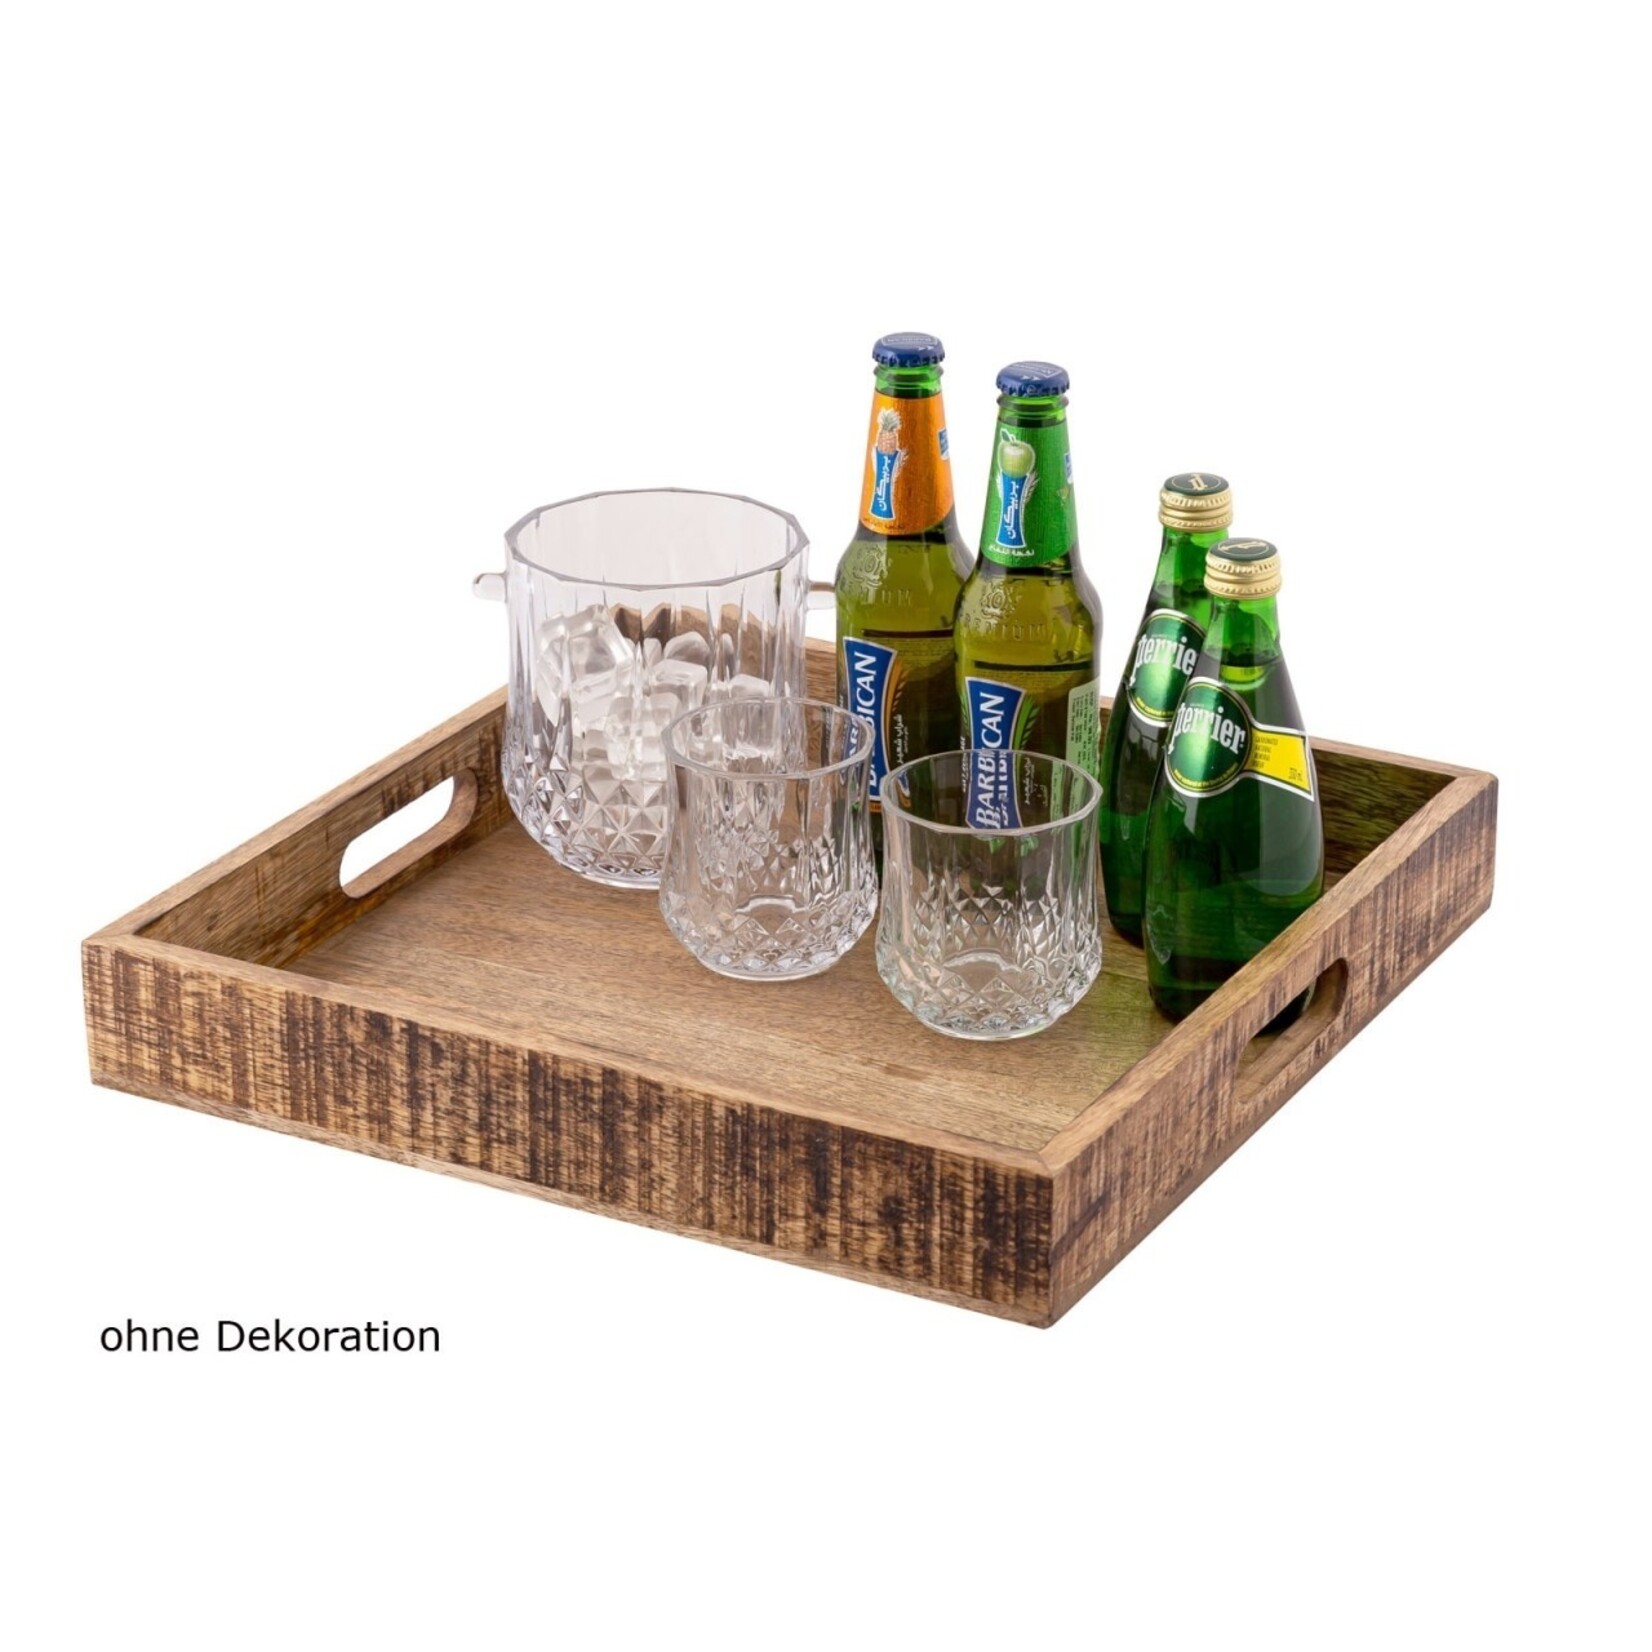 Bobbel Home Bobbel Home - Wooden Tray Decorative Serving Tray Square 40x40cm - Brown - Mango Wood